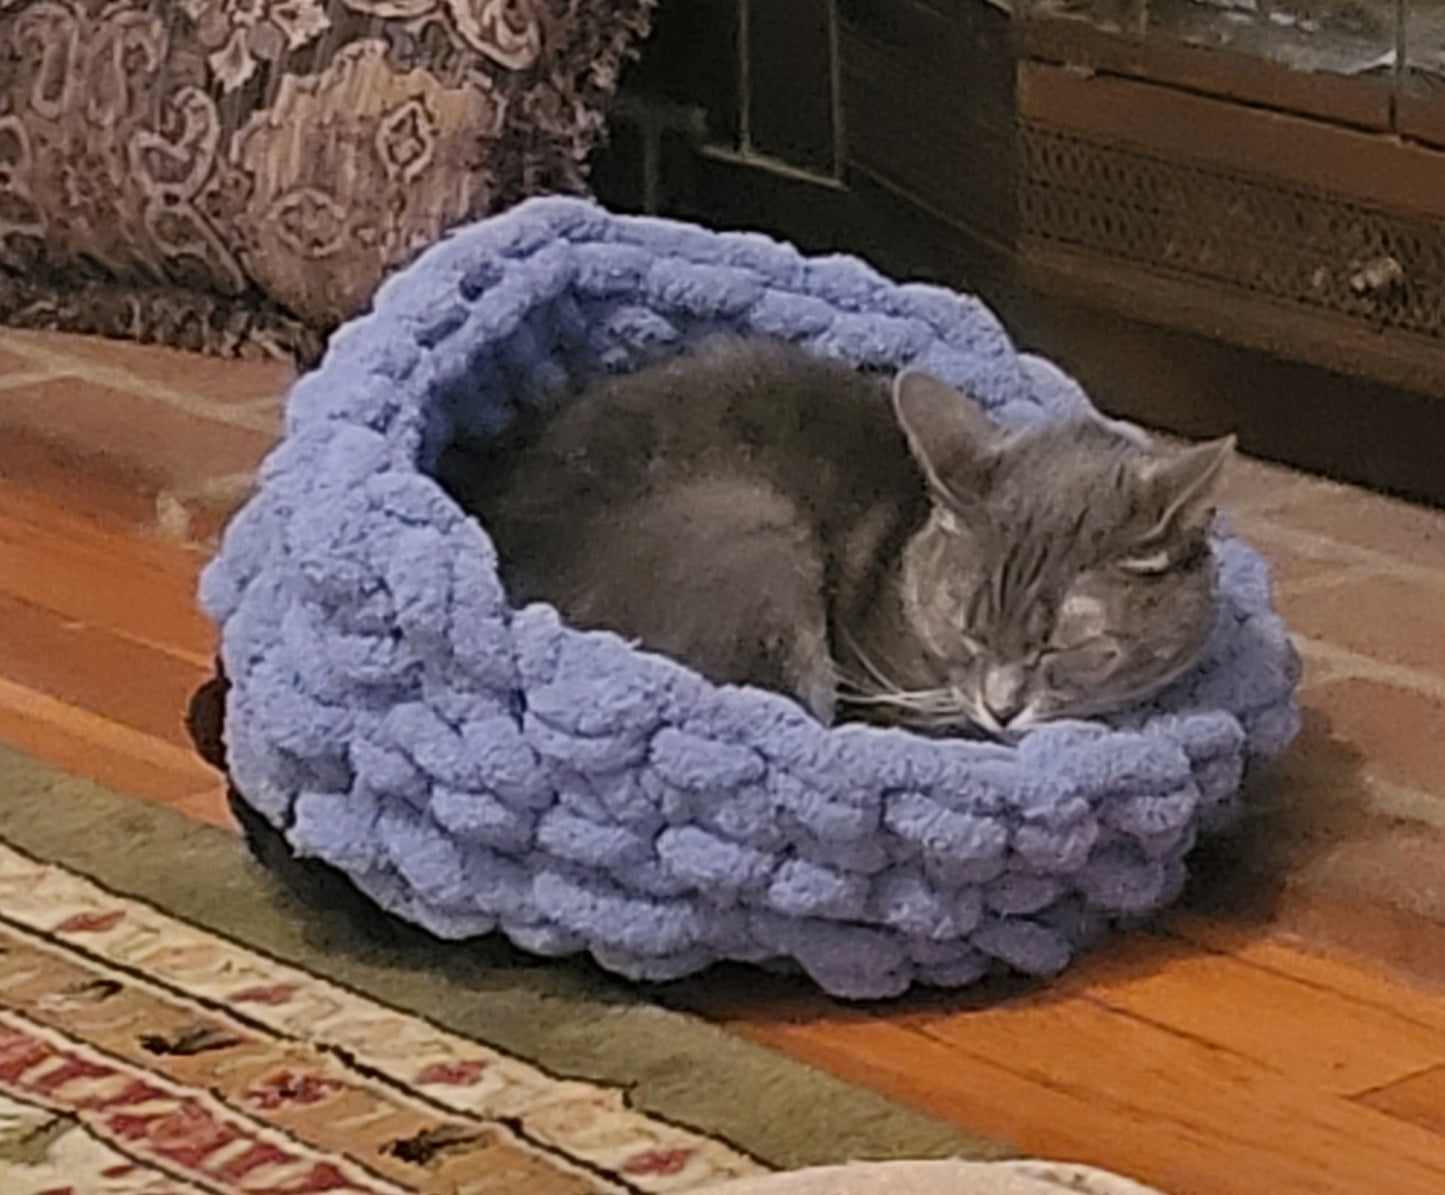 Cozy Cat Beds make sure you look through all the photos